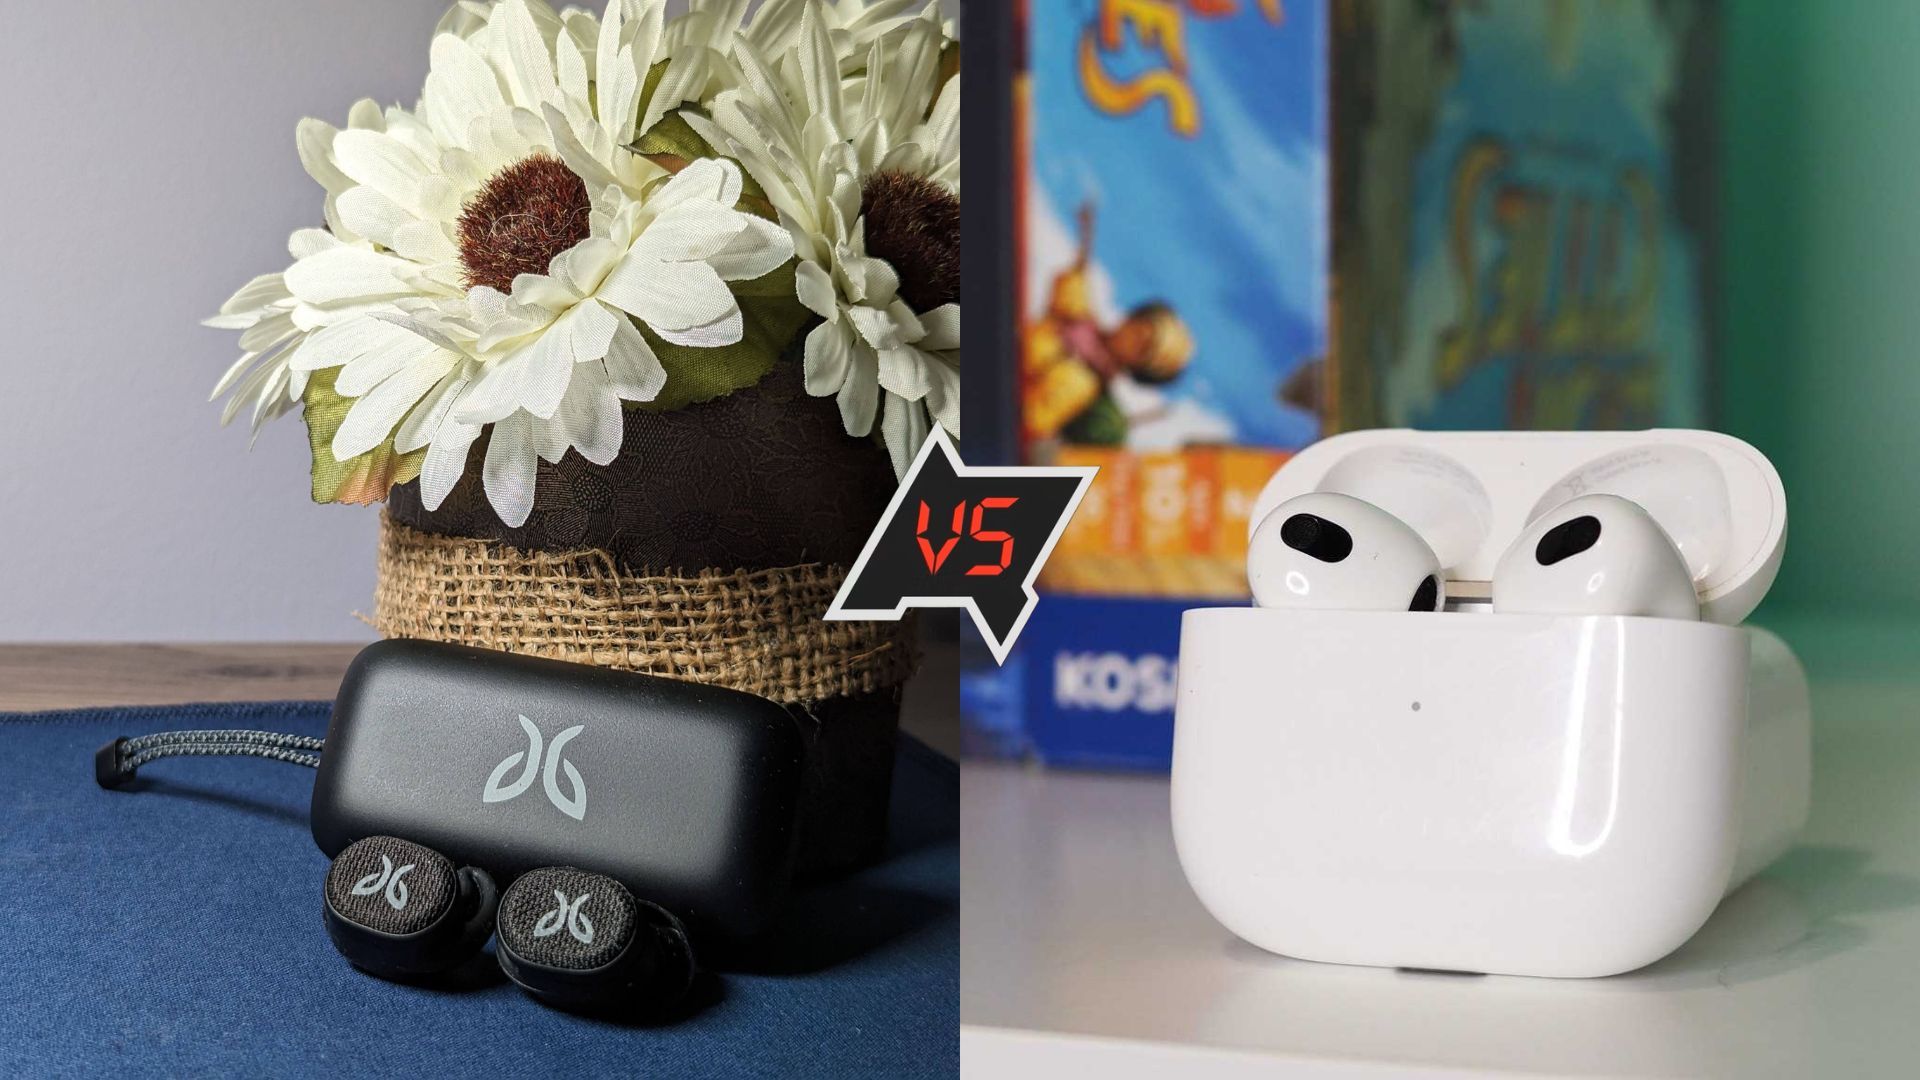 AirPods 3 vs AirPods 2: Visible evolution - PhoneArena